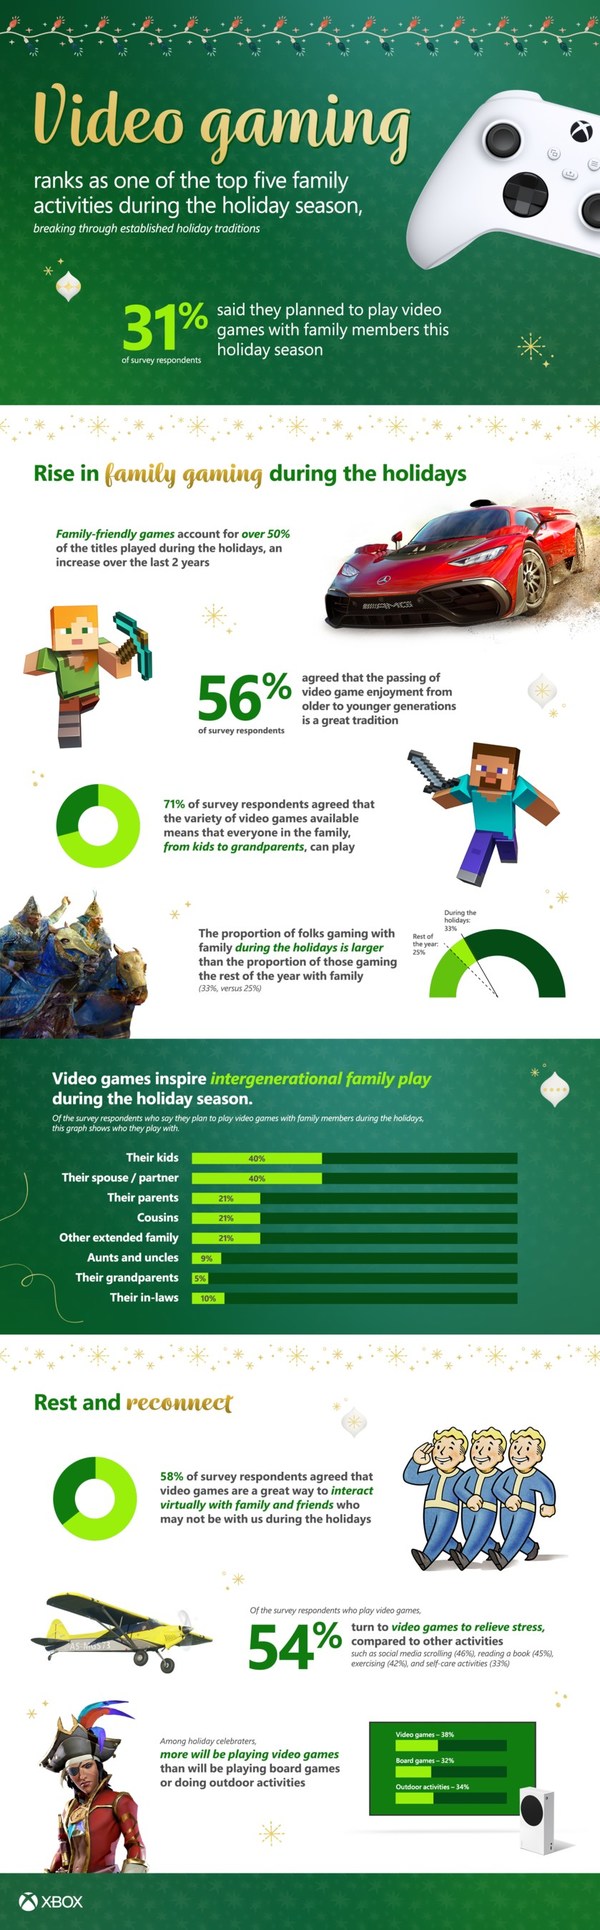 Xbox kicks-off its holiday season with a new global survey by YouGov that finds families love to connect through gaming over the holidays season.